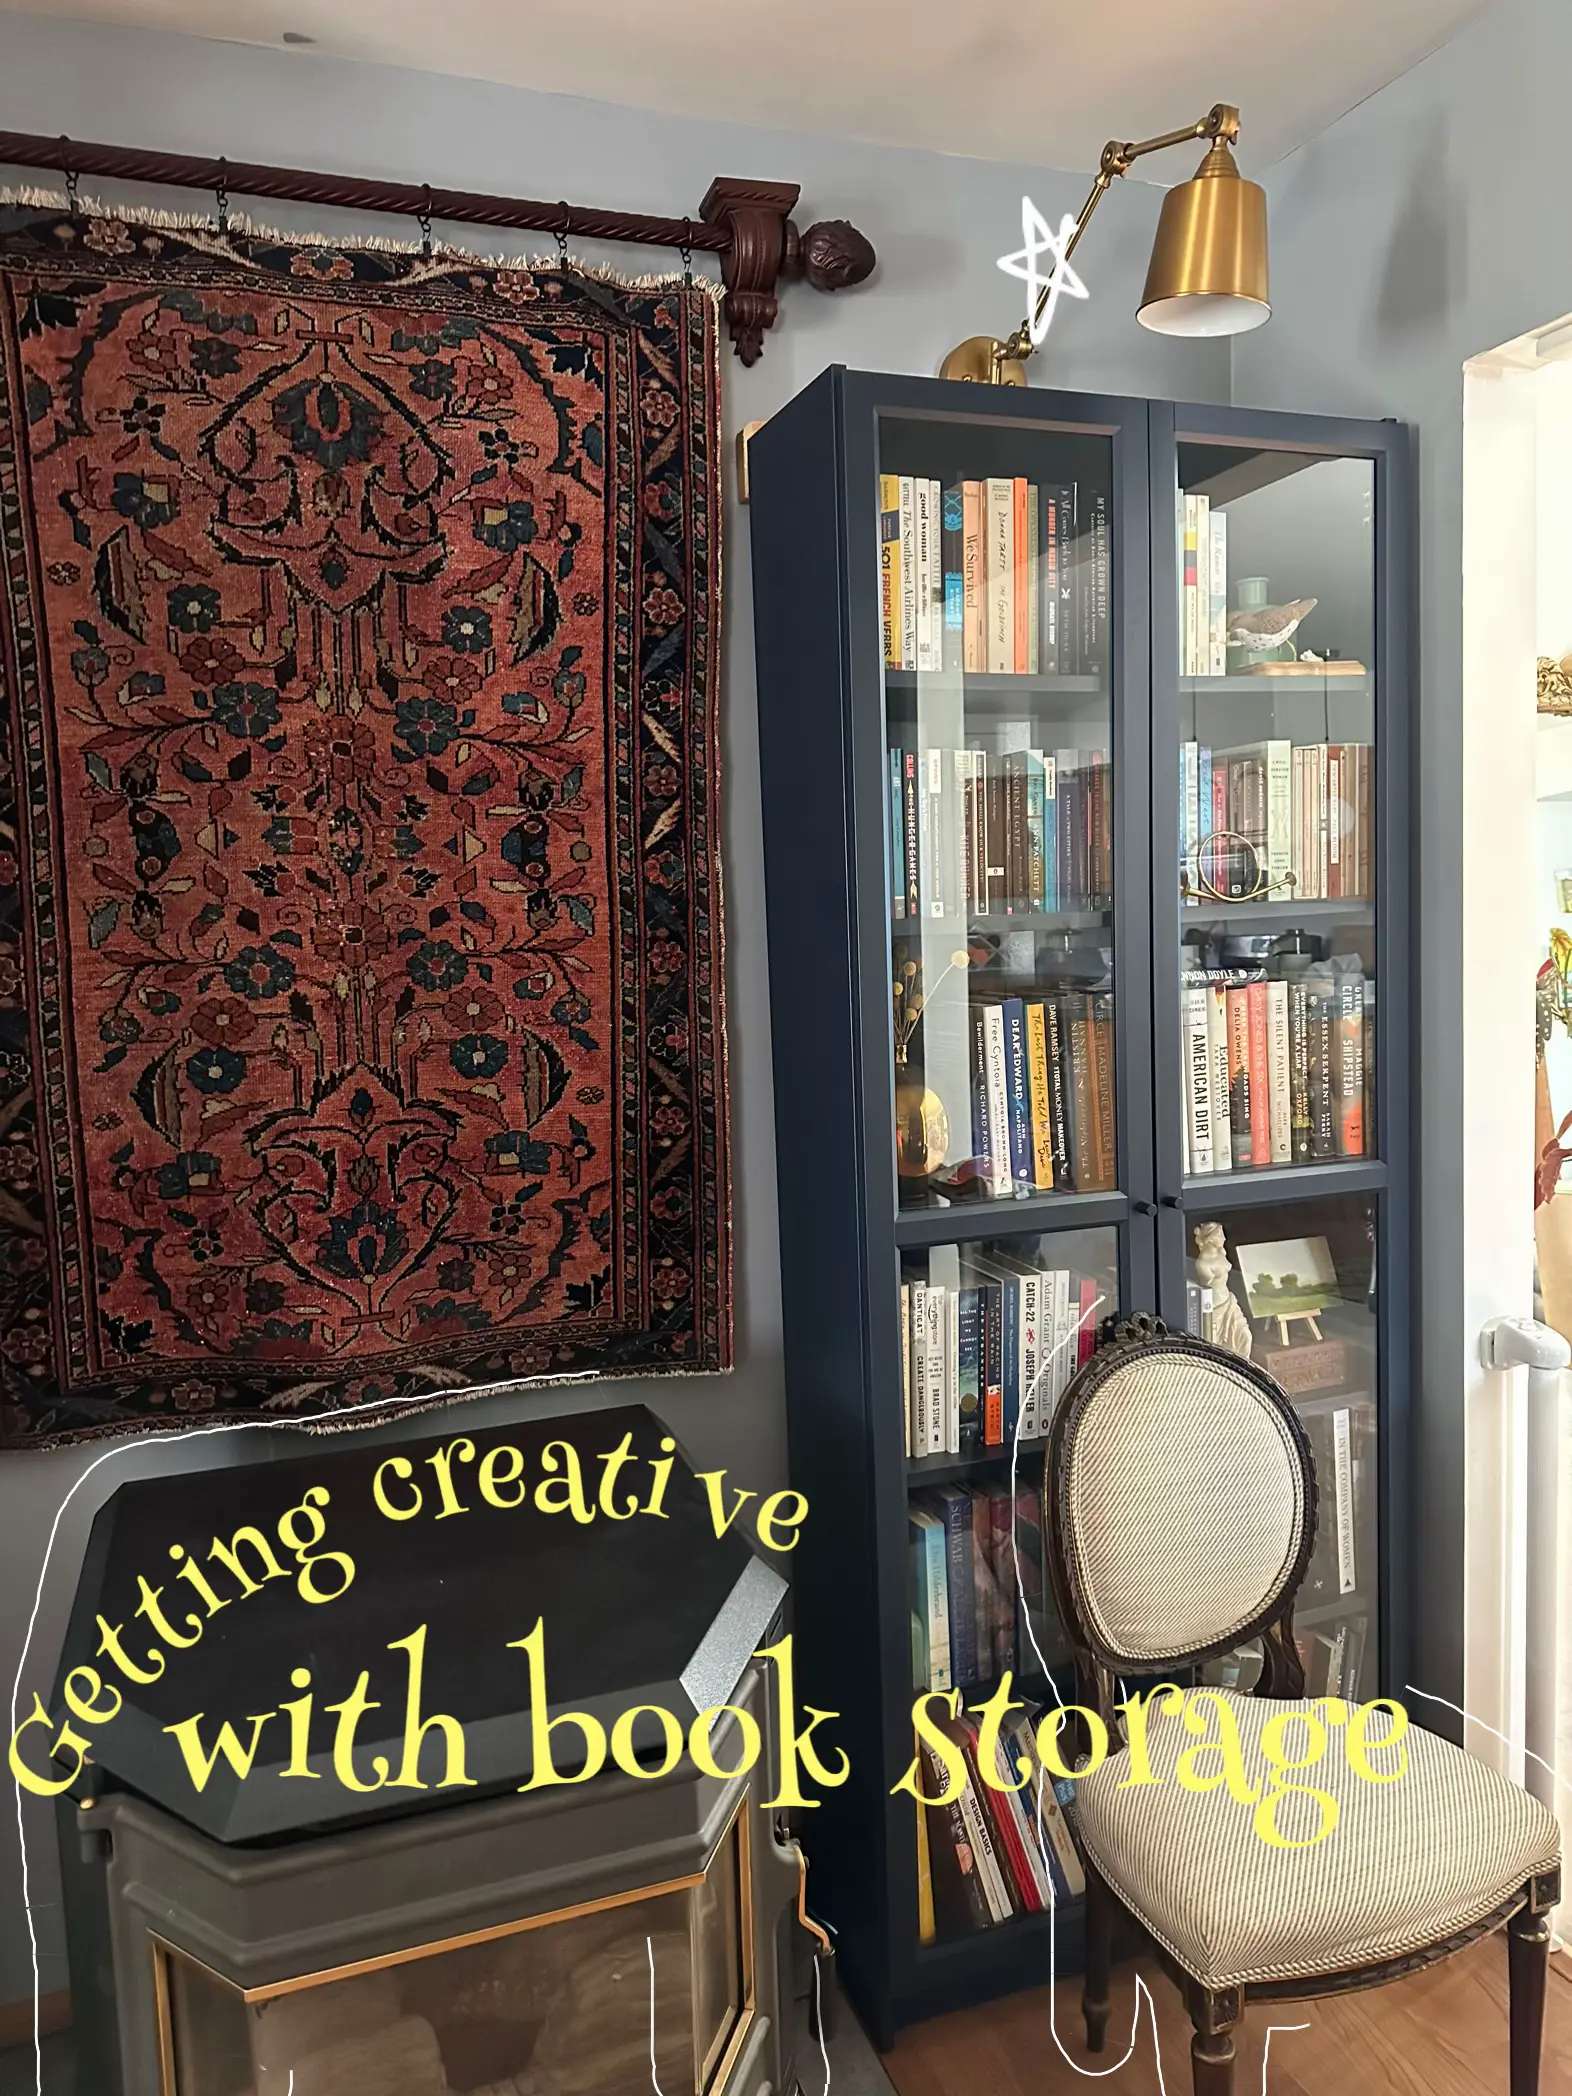 Get creative with these book storage ideas